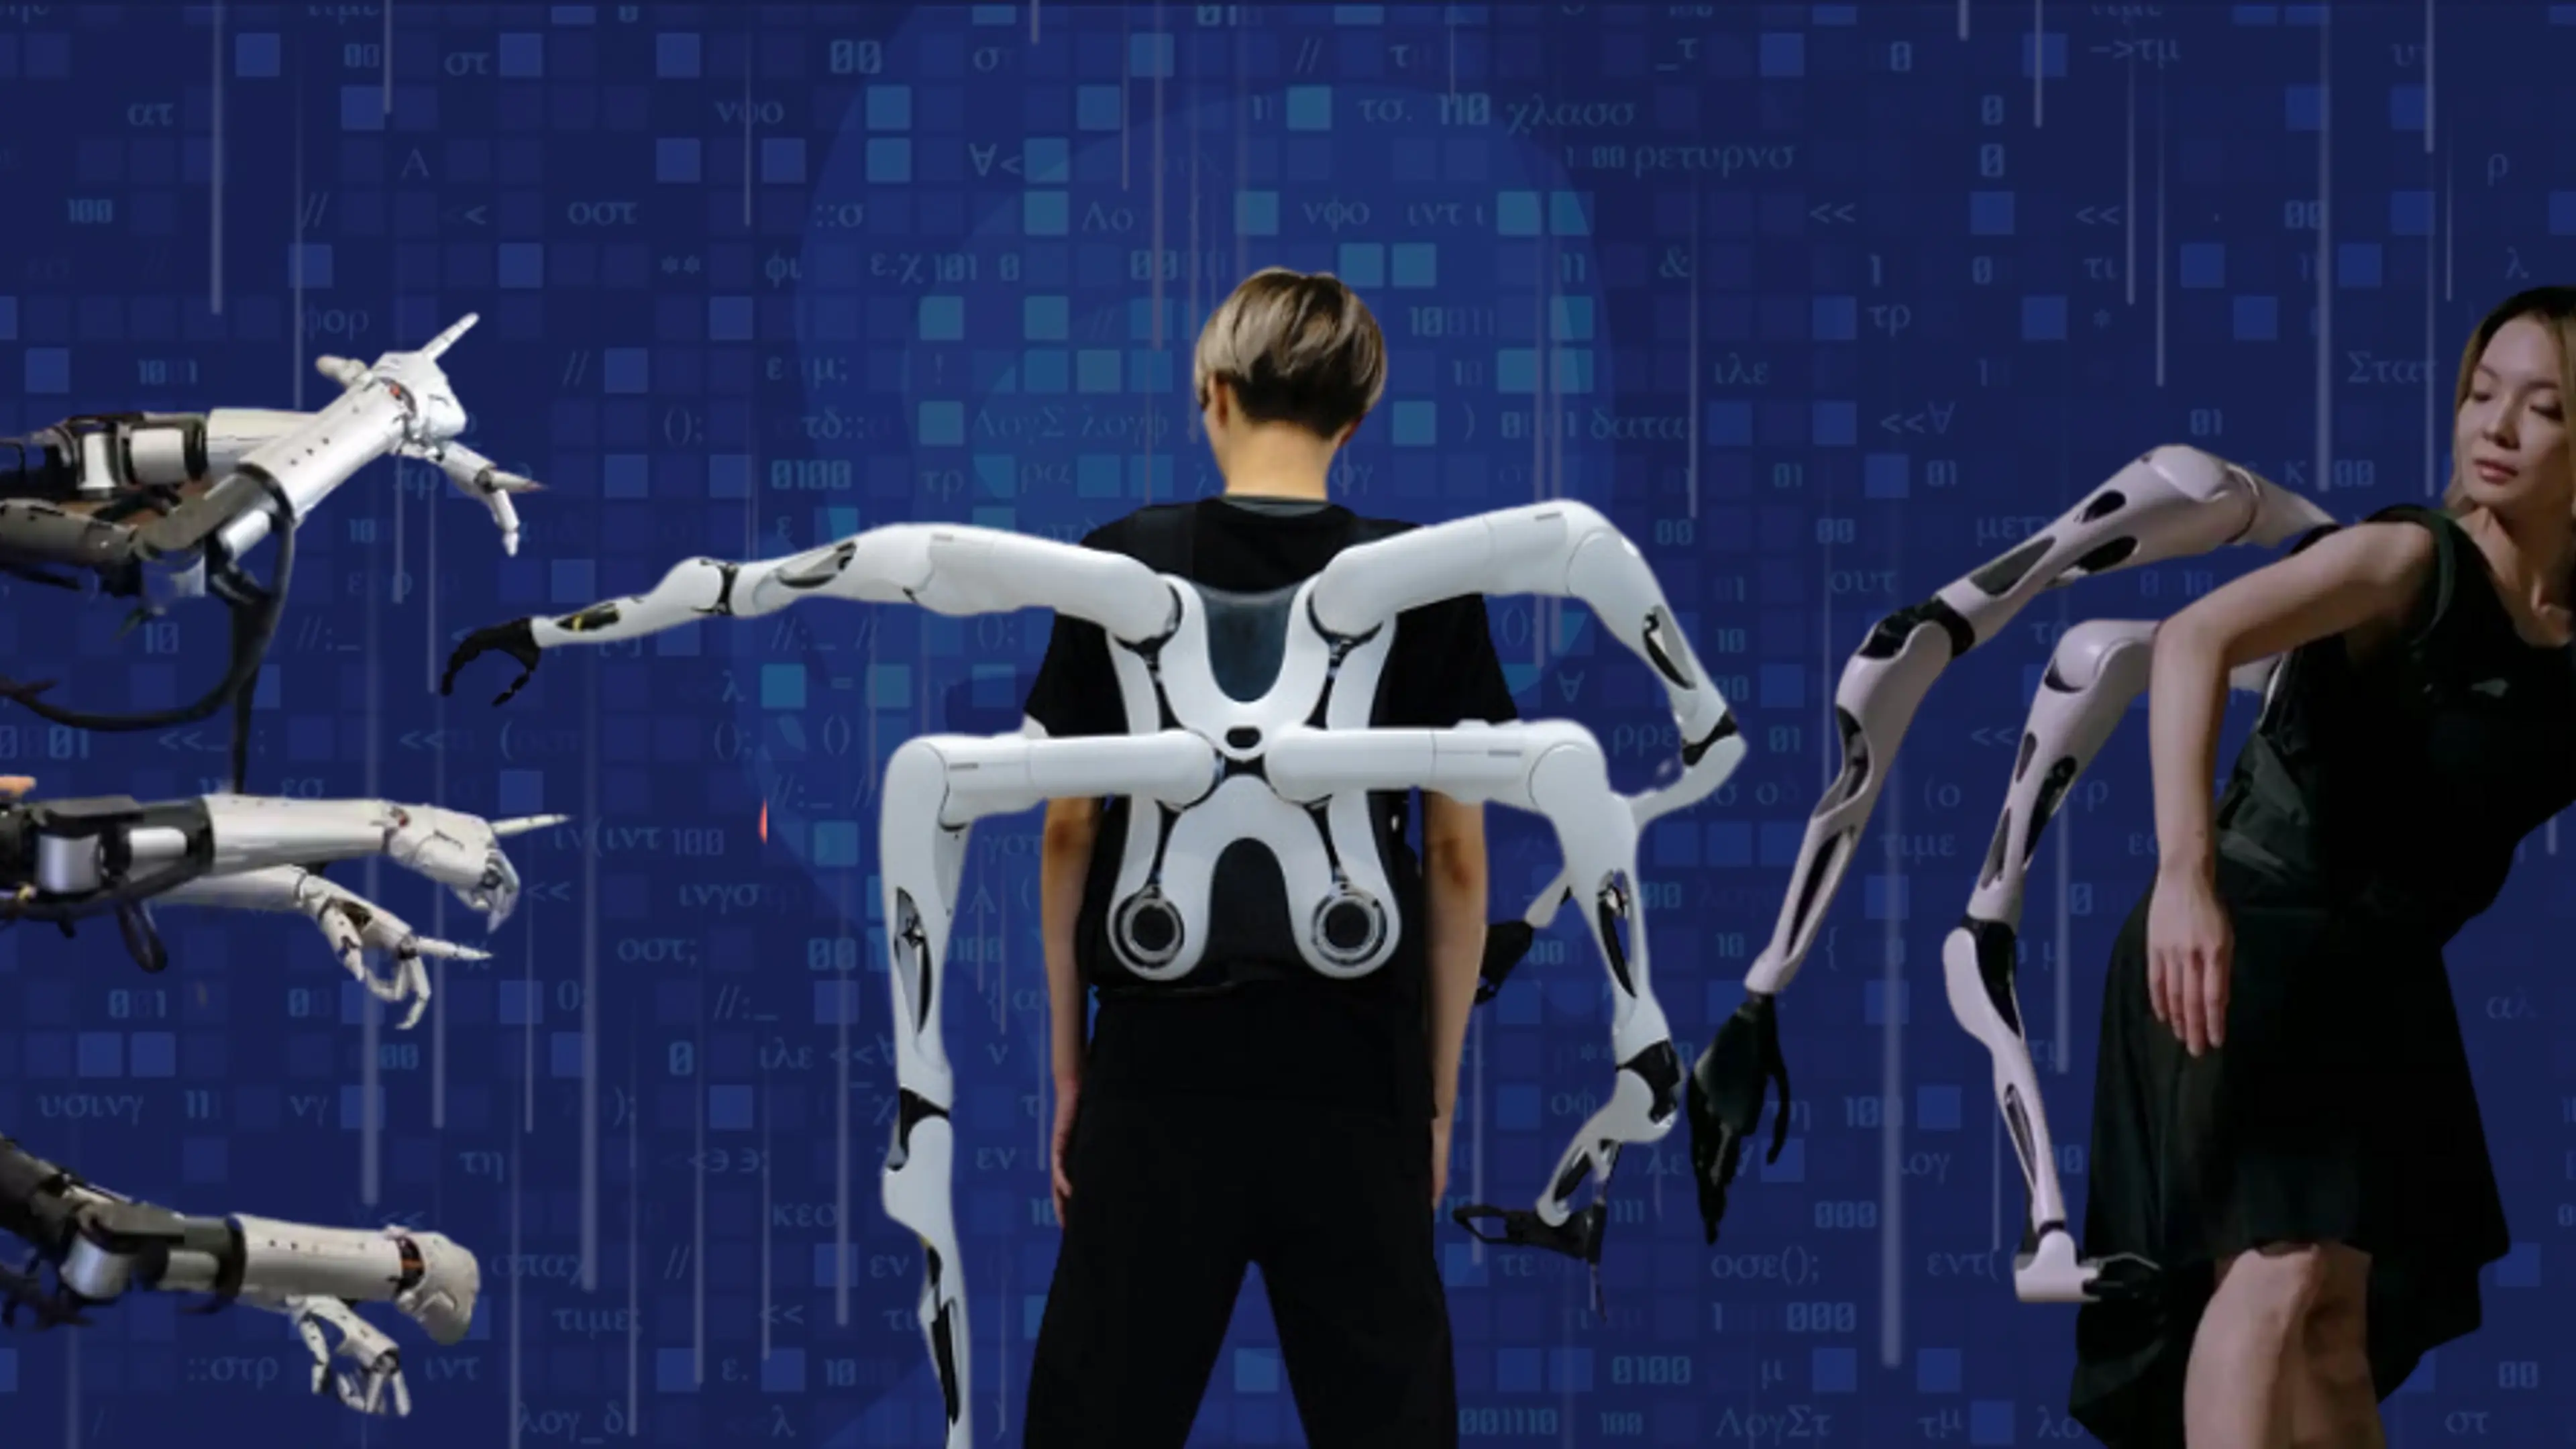 Meet Doctor Octopus in Real Life: The AI Backpack with Six Robotic Arms